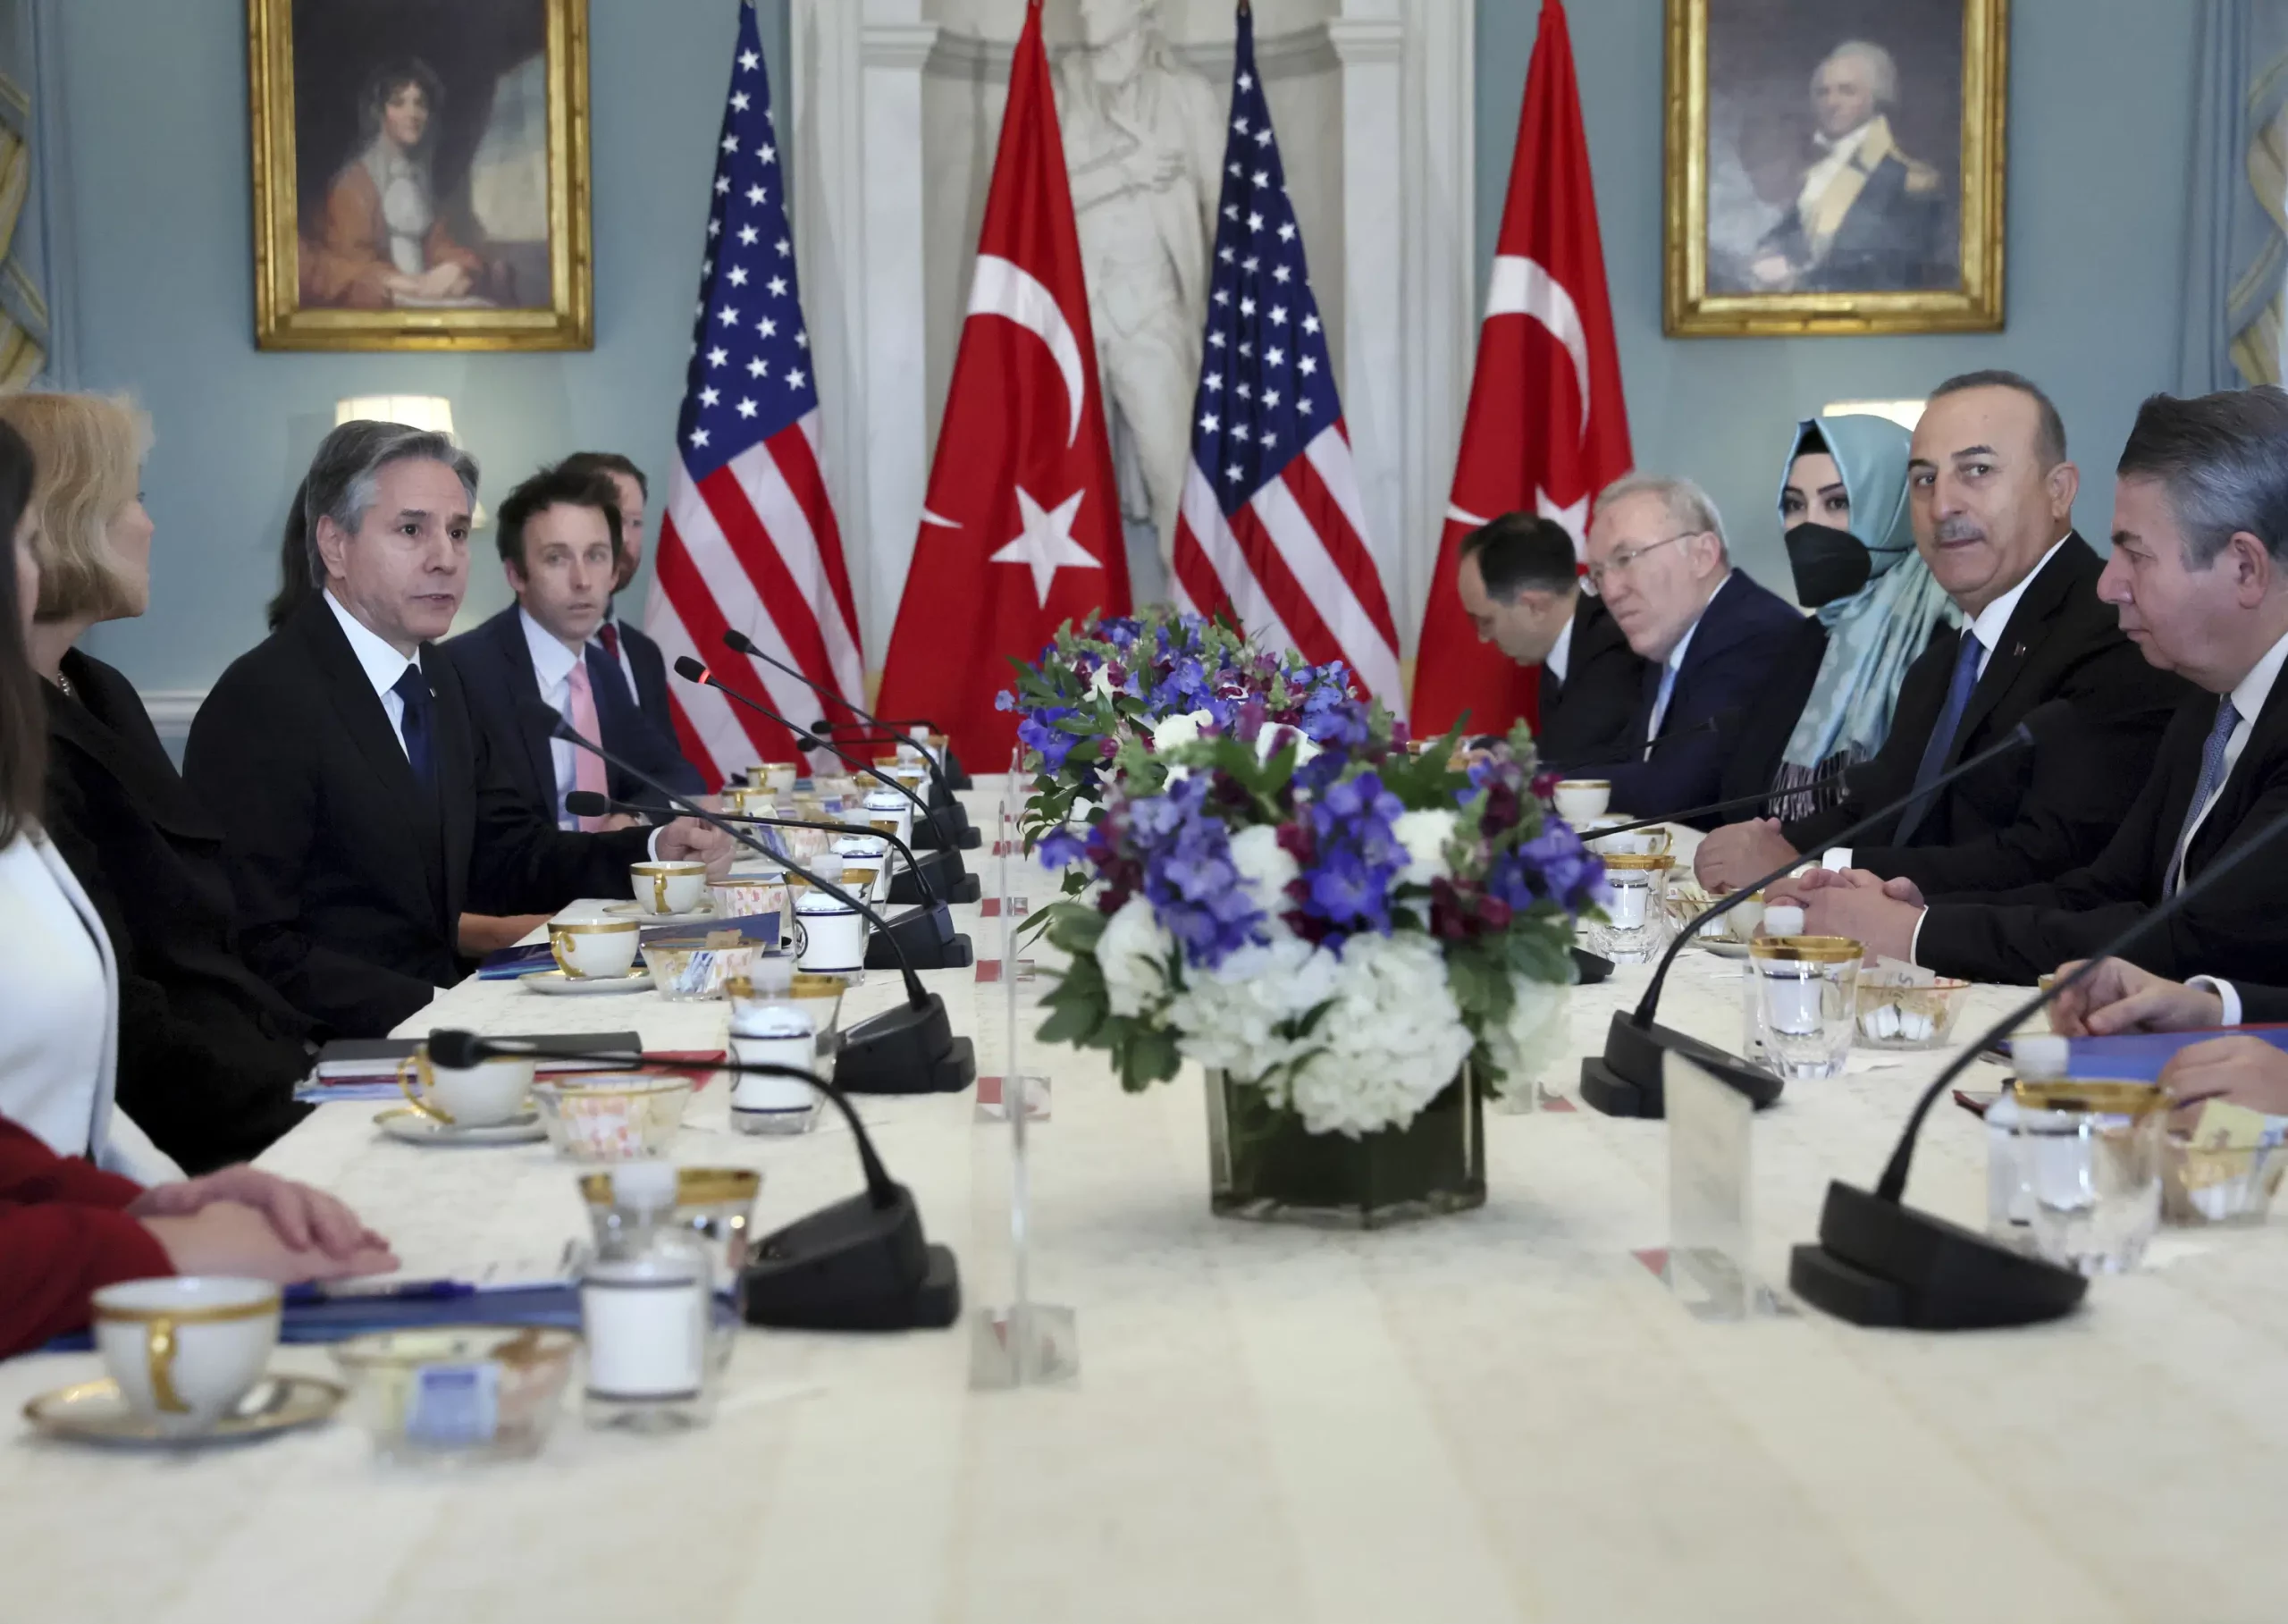 NATO allies US, Turkey try to mend fences but rifts persist 4